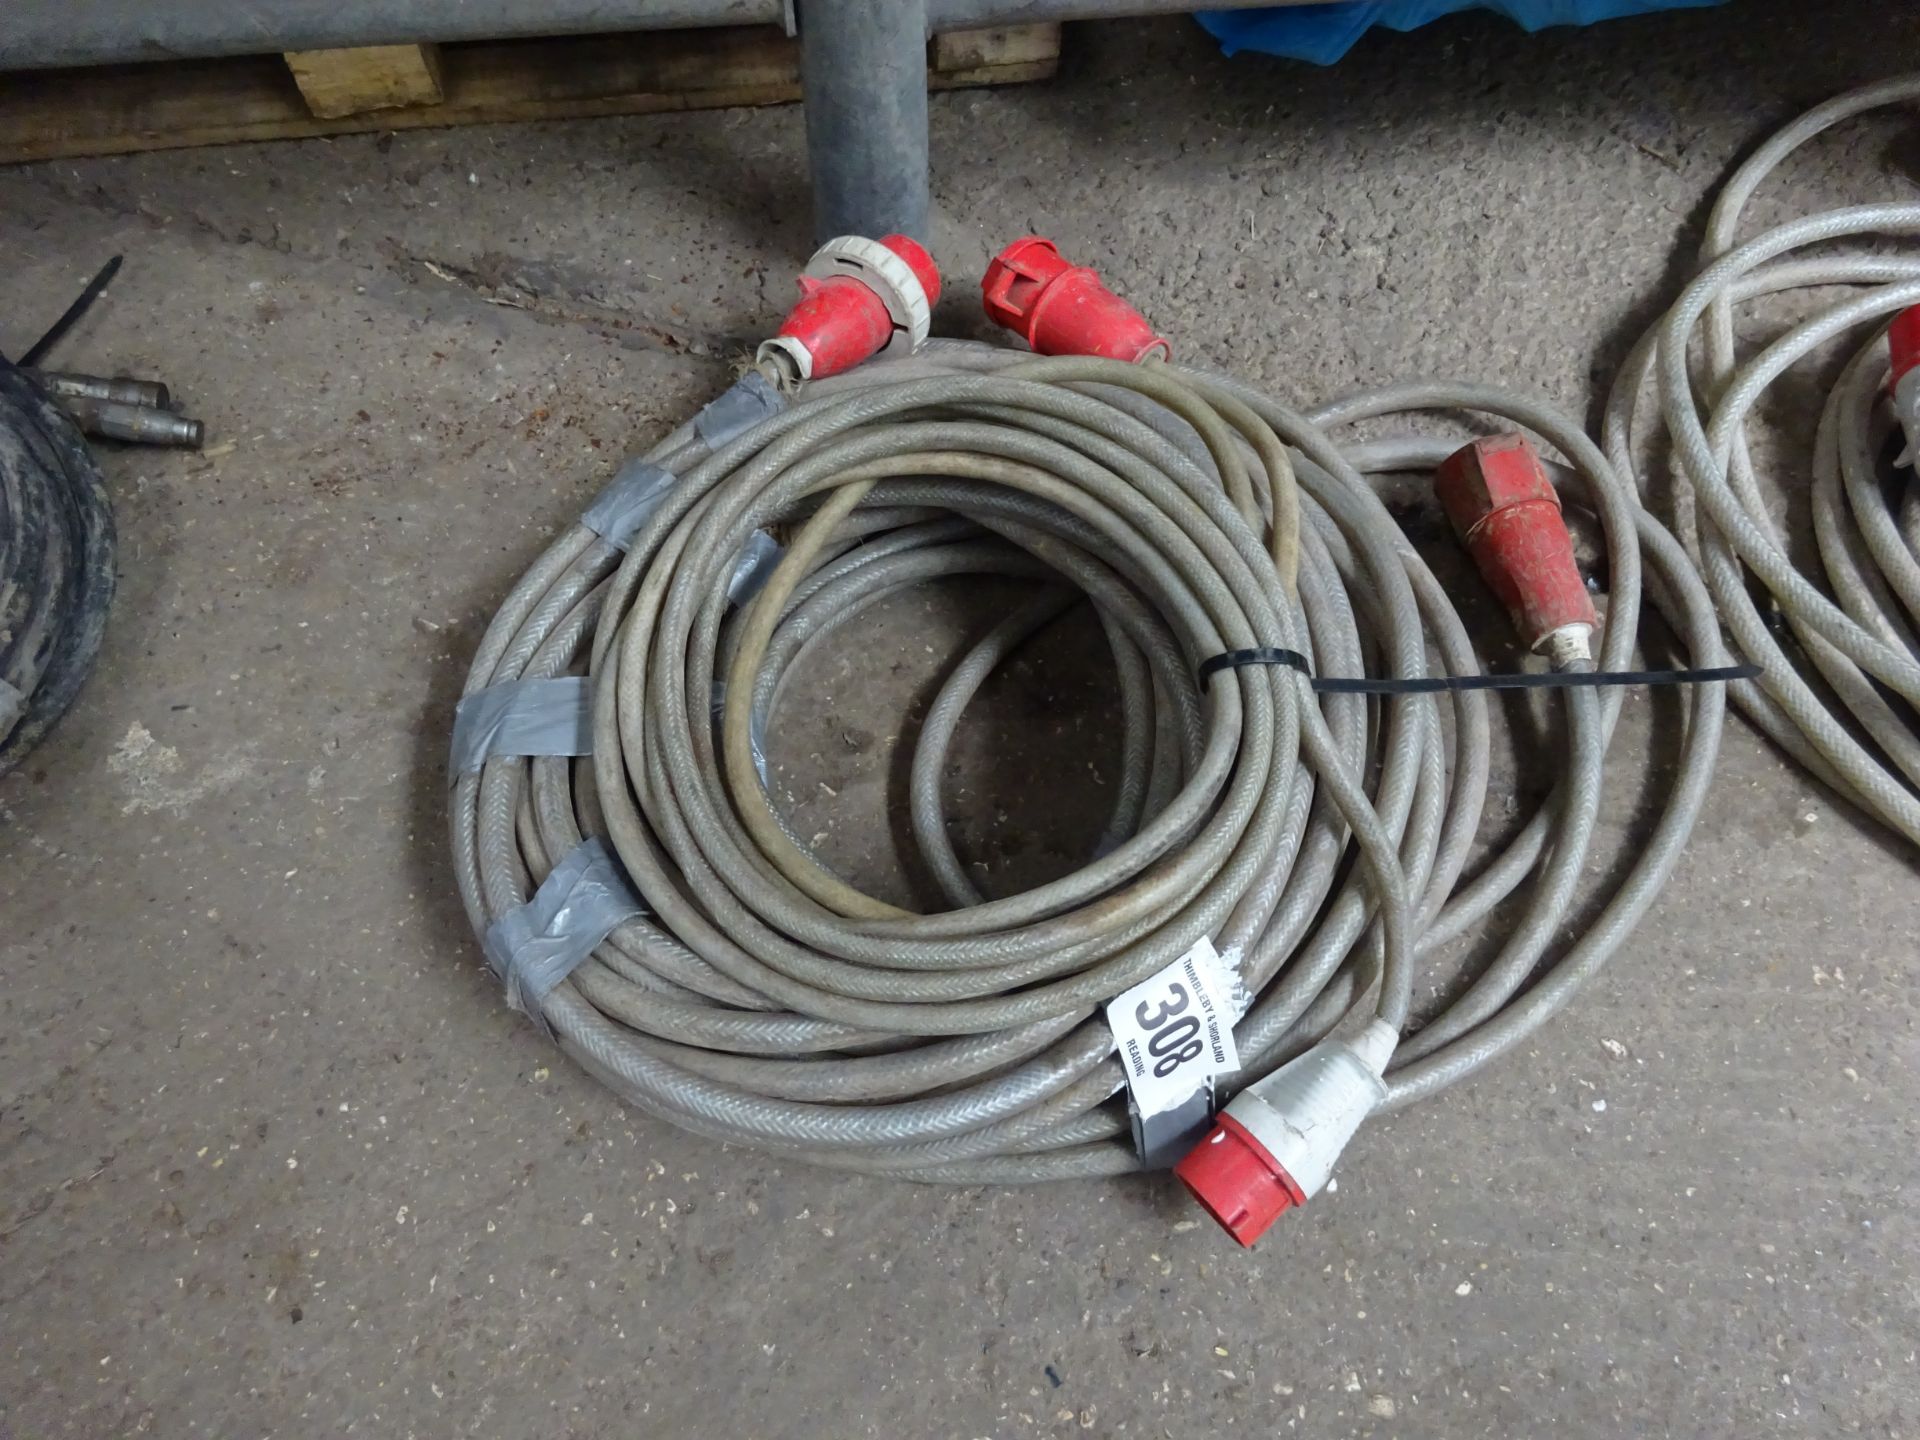 415v extension cable